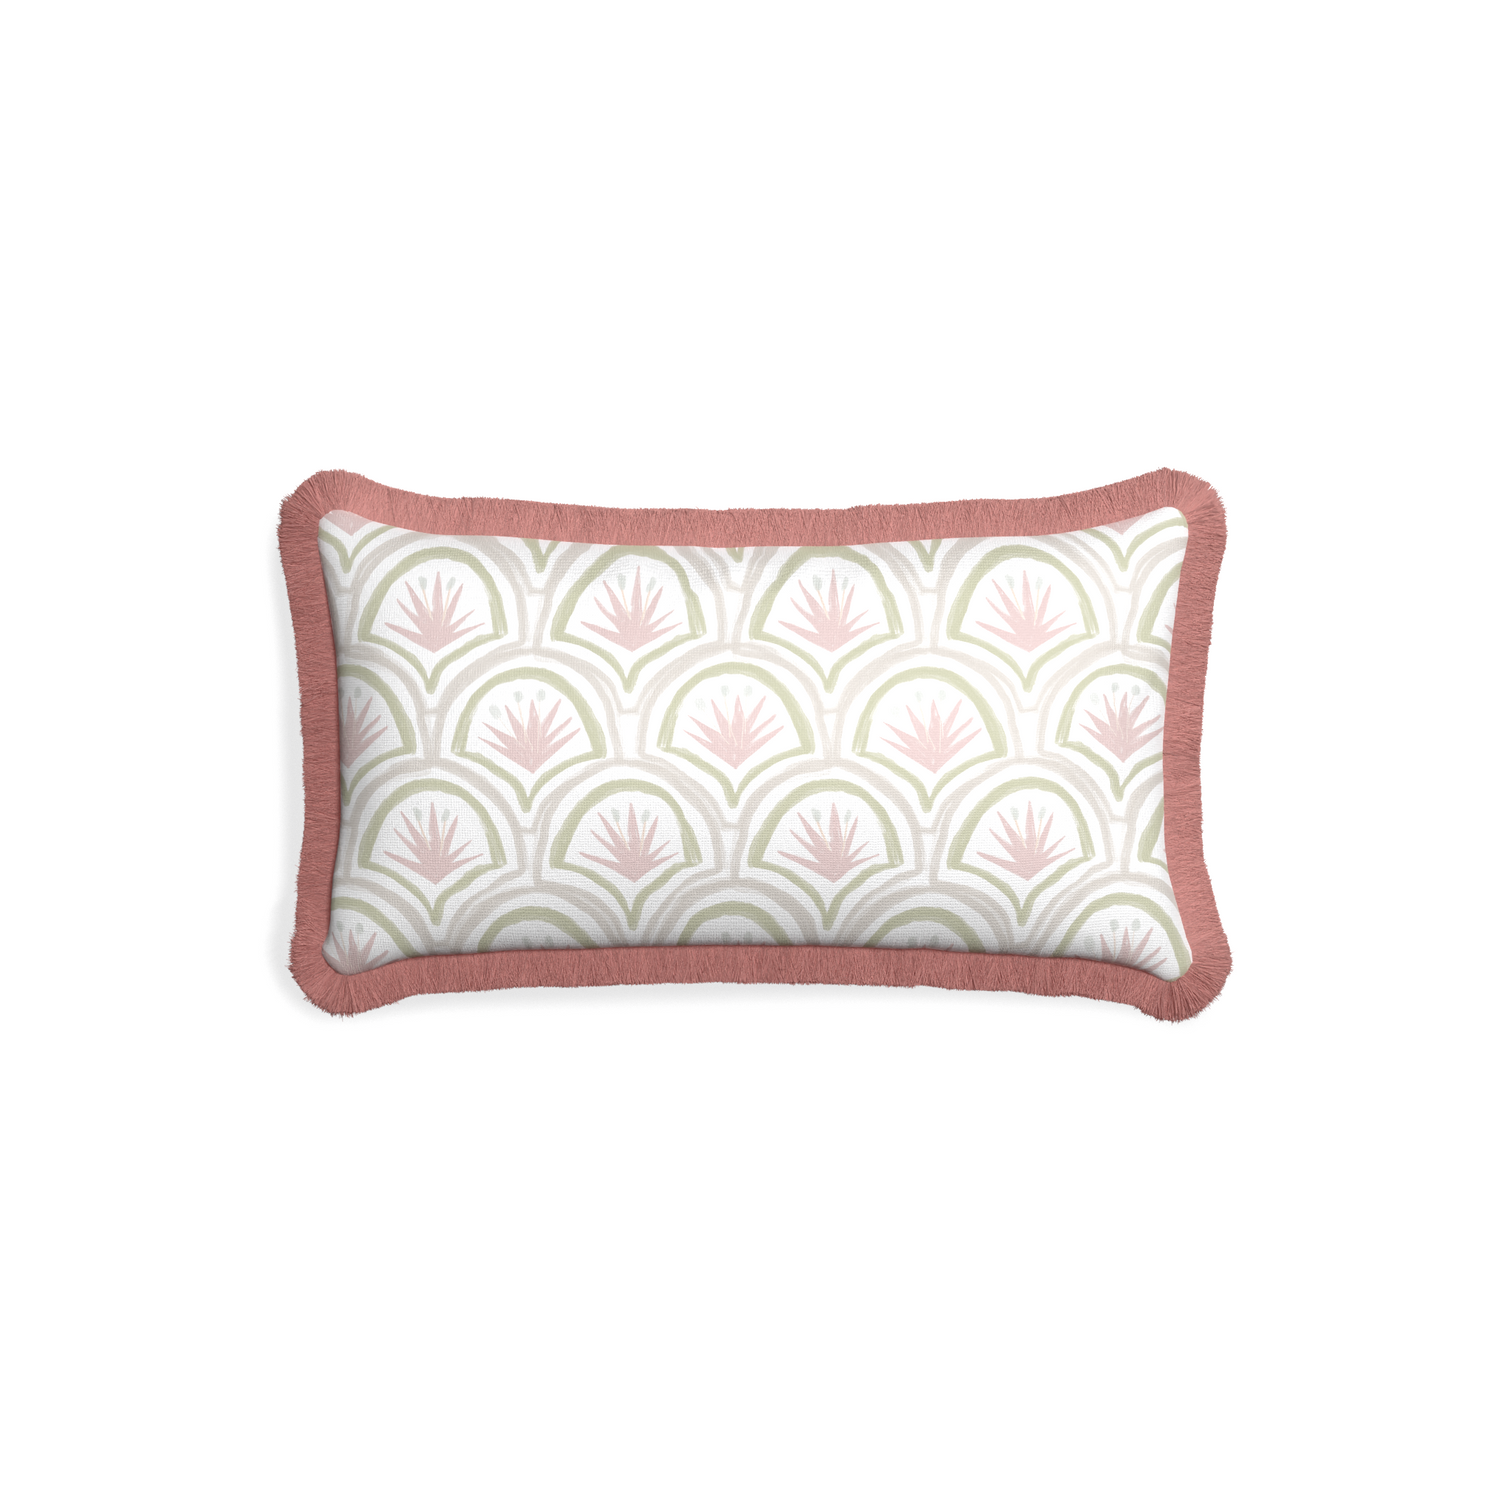 Petite-lumbar thatcher rose custom pink & green palmpillow with d fringe on white background